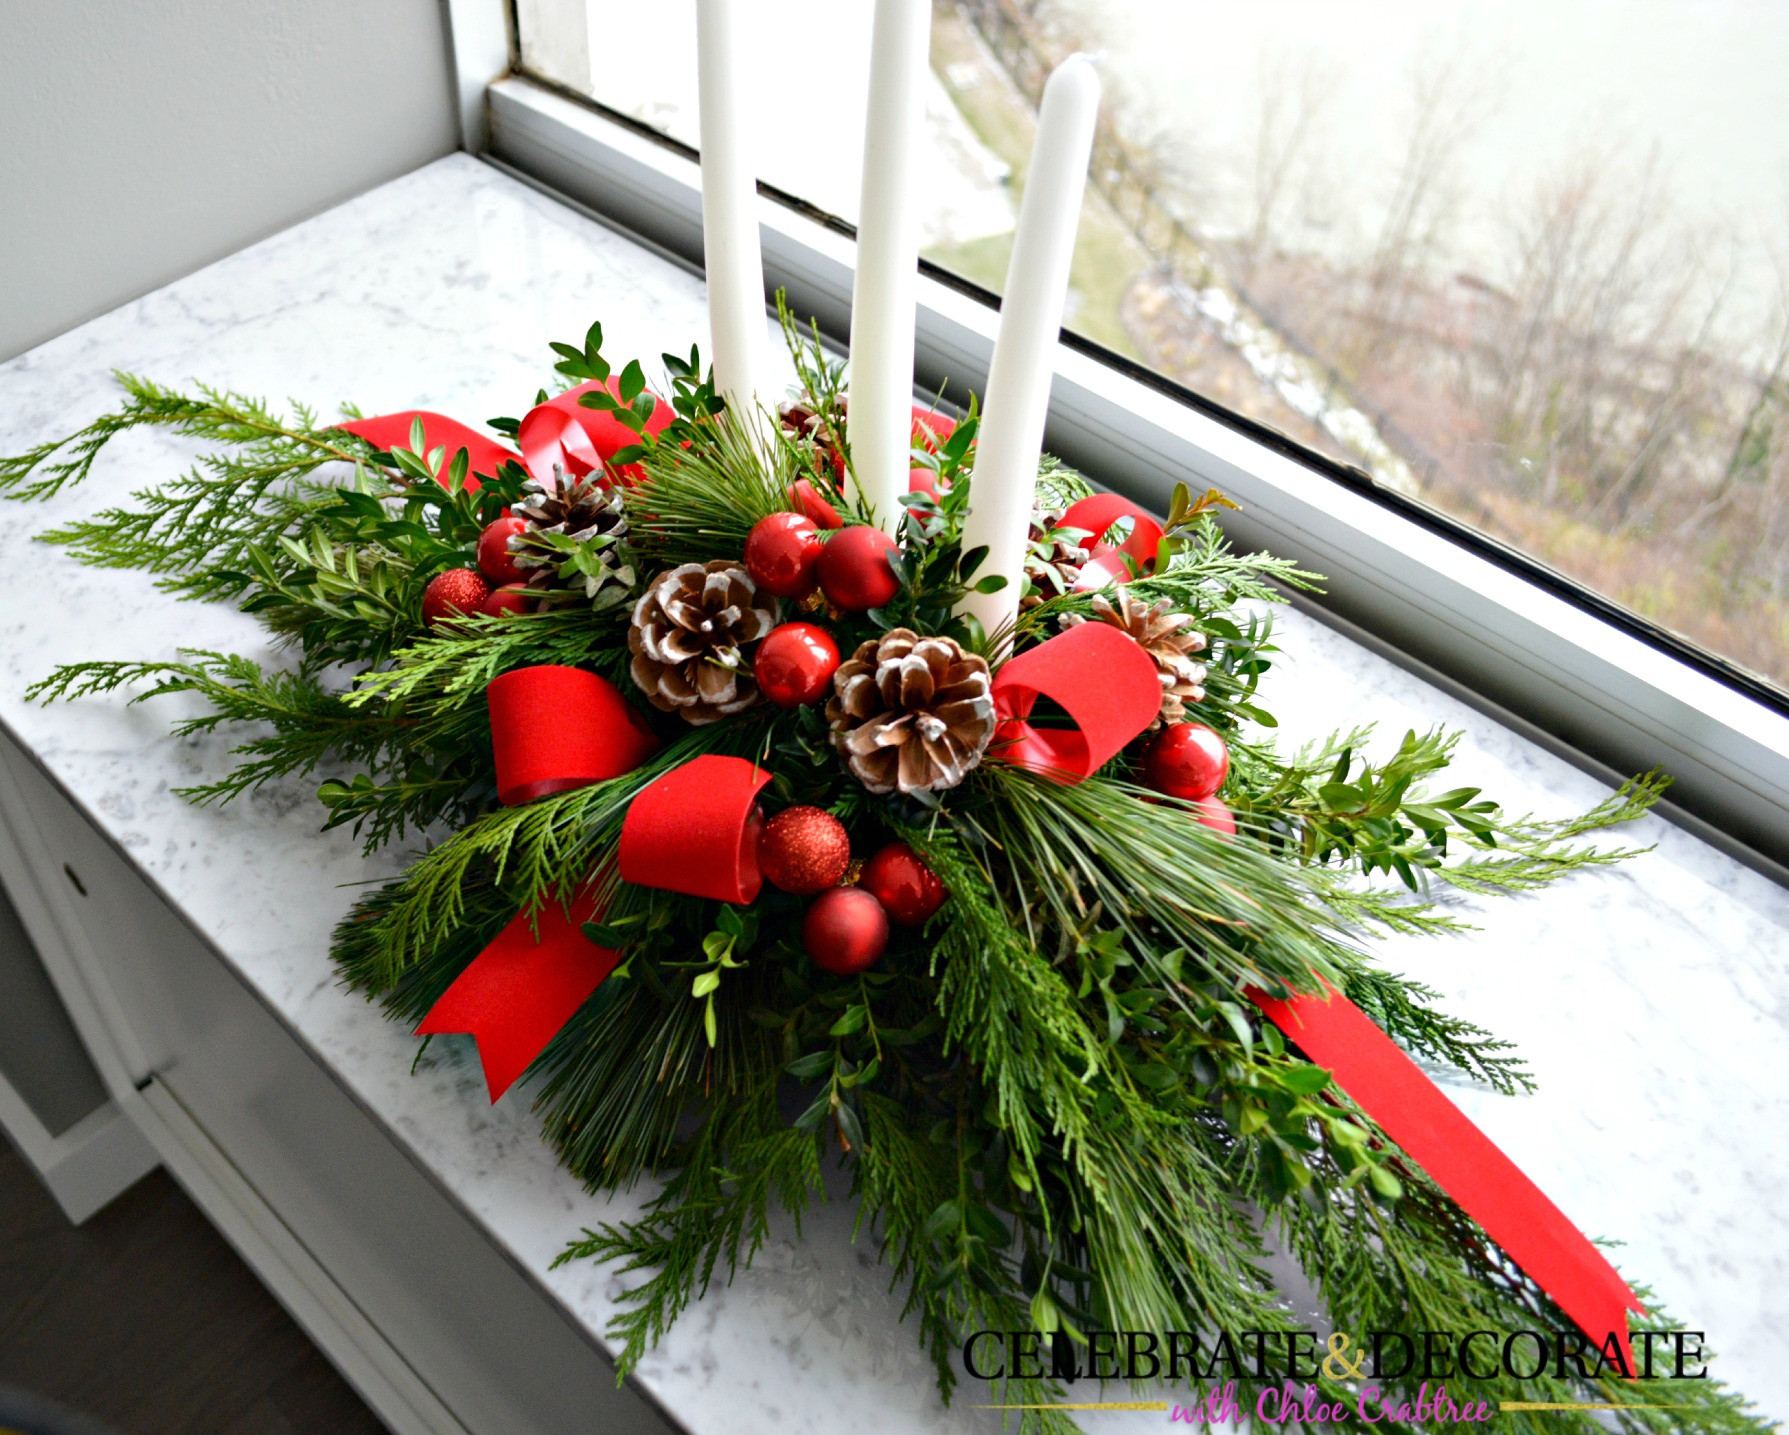 Homemade Christmas Flower Arrangements
 A Fall Centerpiece of Magnolia Leaves and Feathers